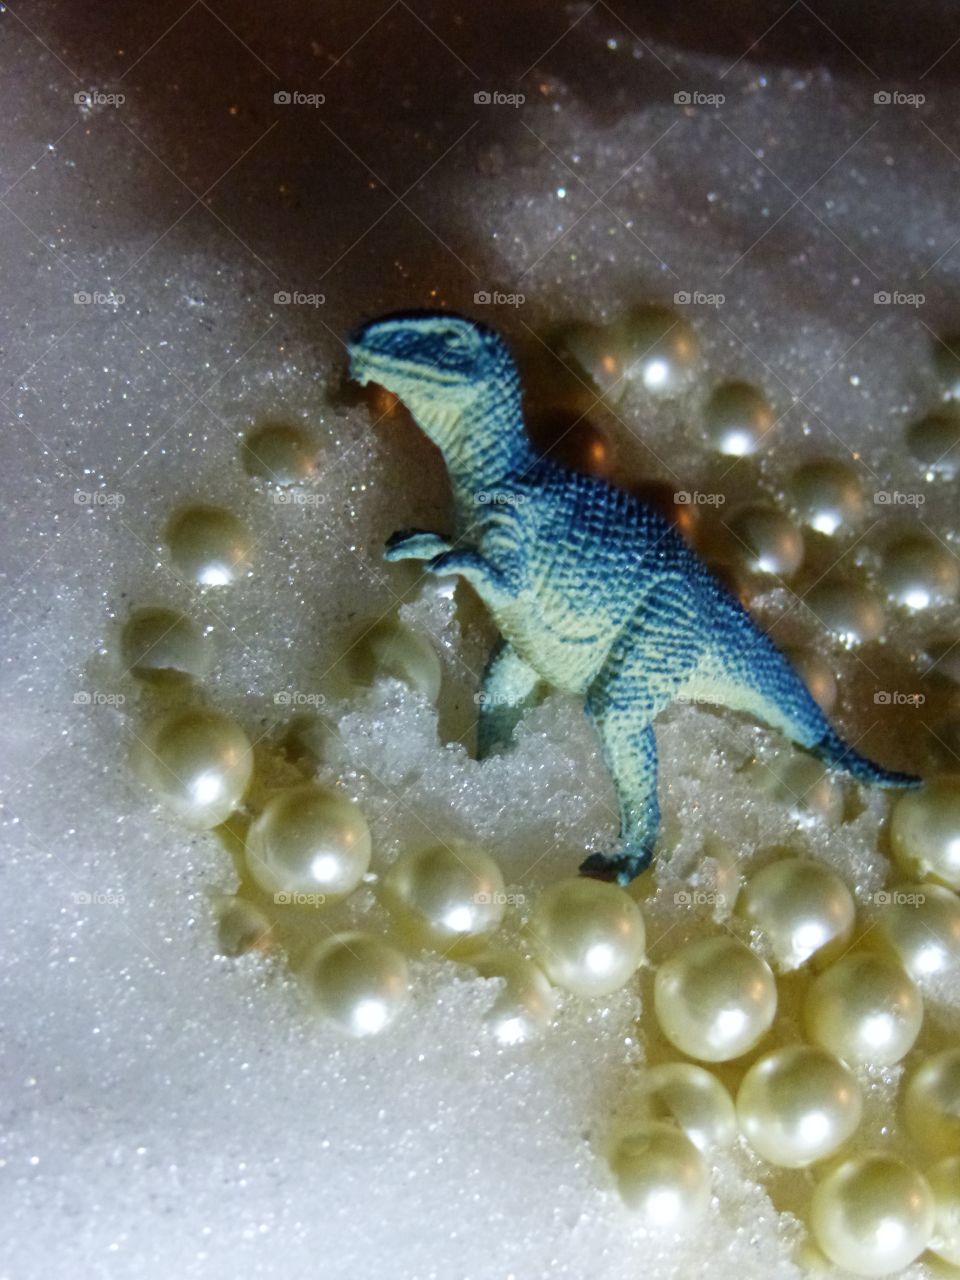 dinosaur in snow and pearls